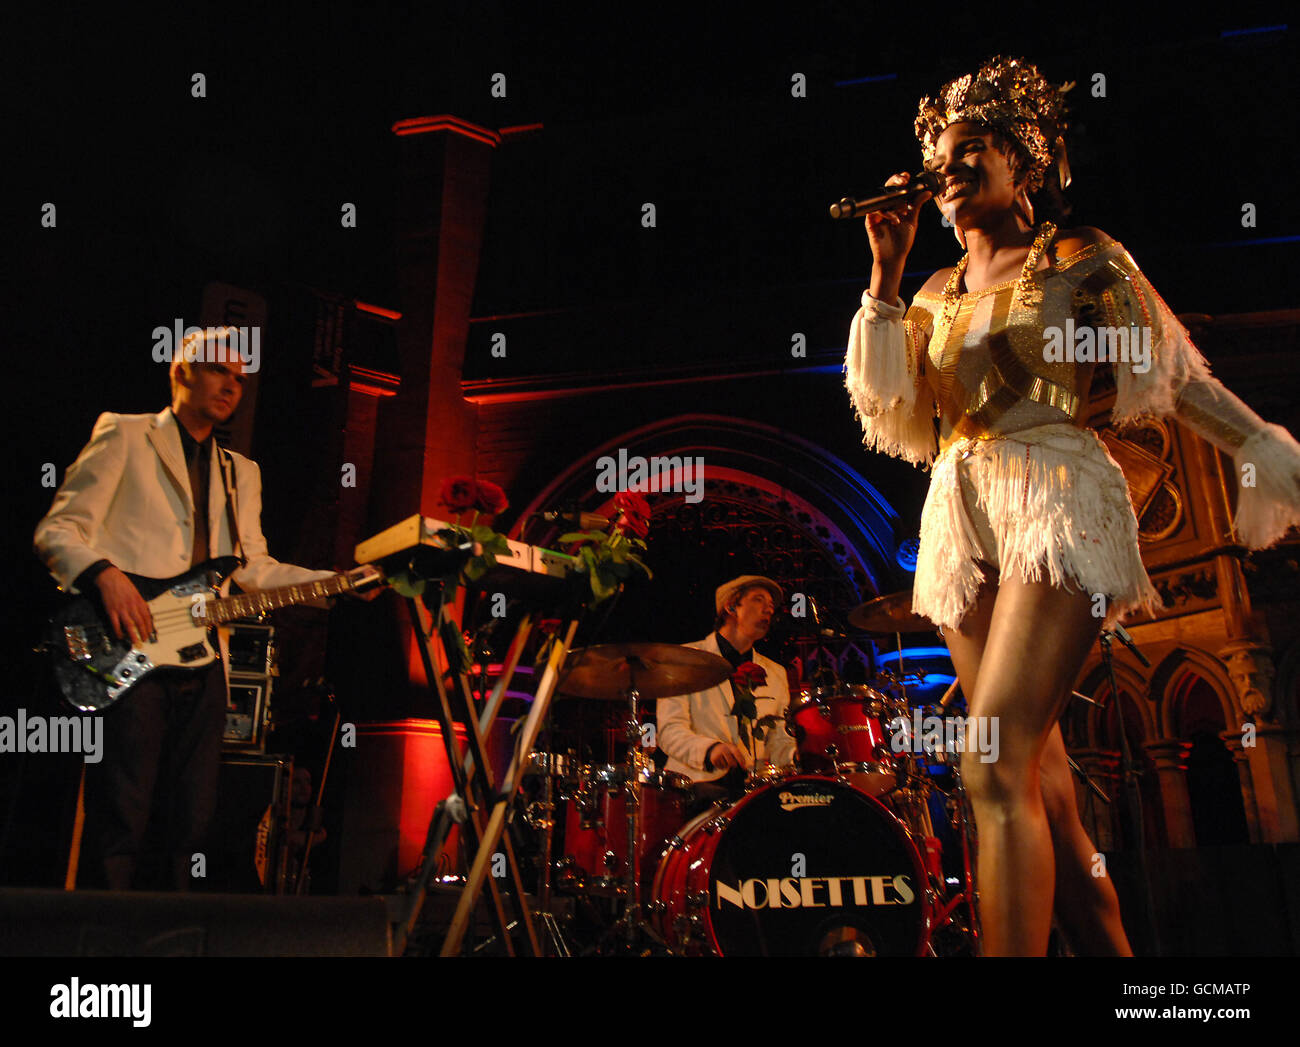 Shingai Shoniwa of the Noisettes performing on stage at the Union Chapel in north London. The concert is a warm up show before the band travels to Milawi to take part in the Lake of Stars Festival in October. Stock Photo